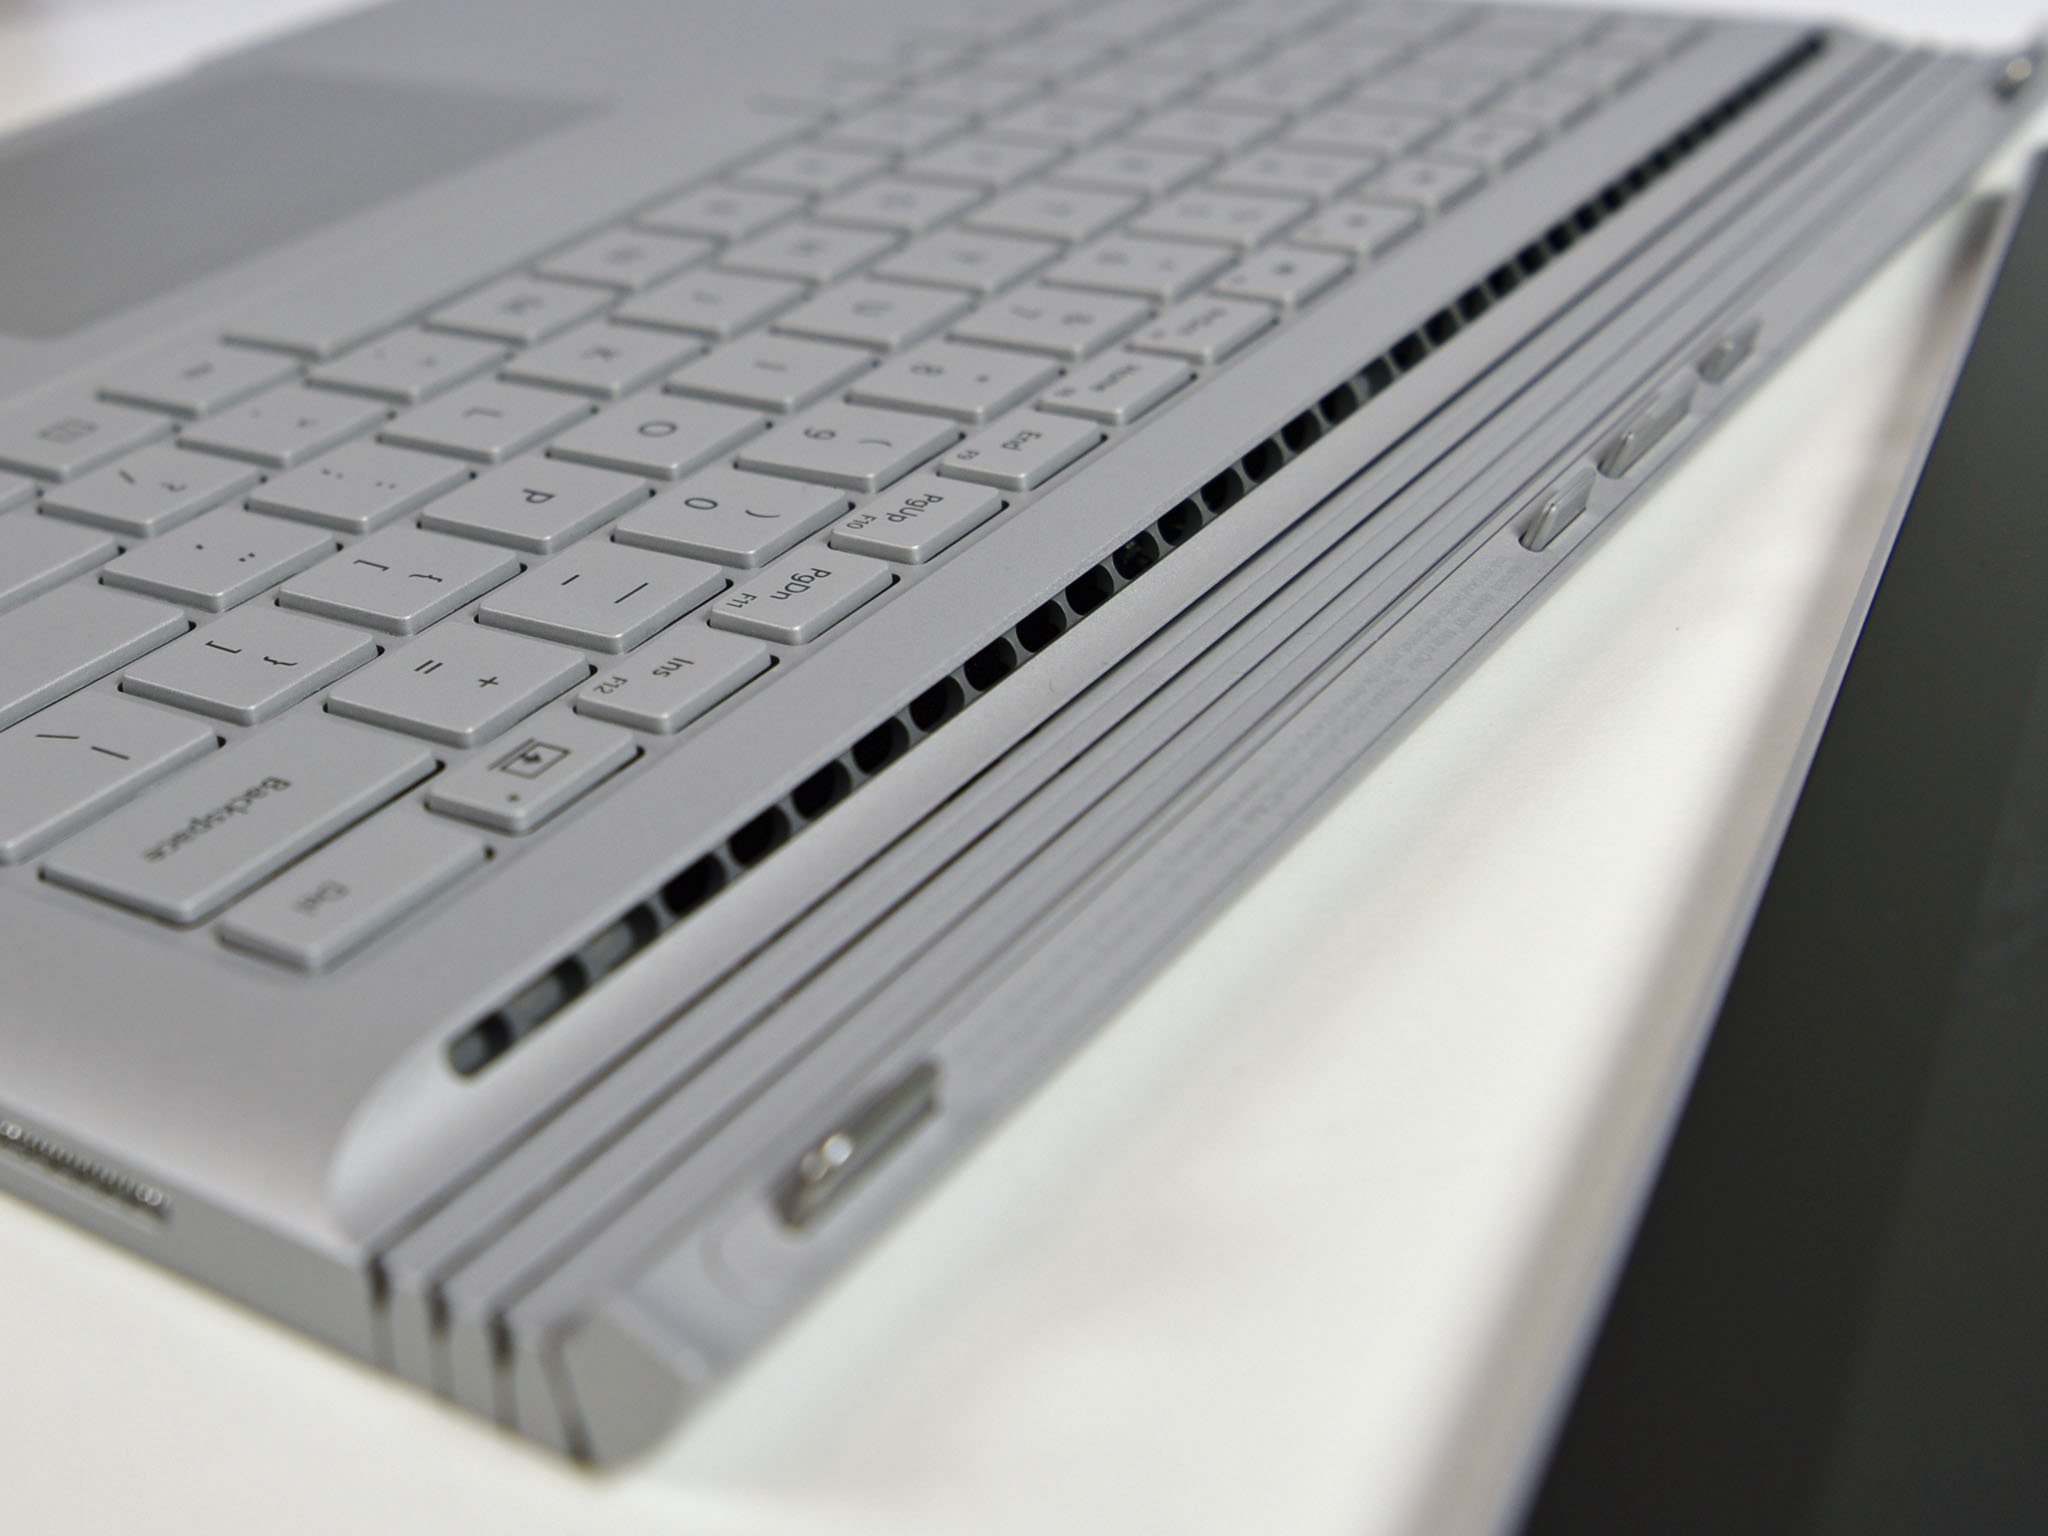 Surface Book Performance Base